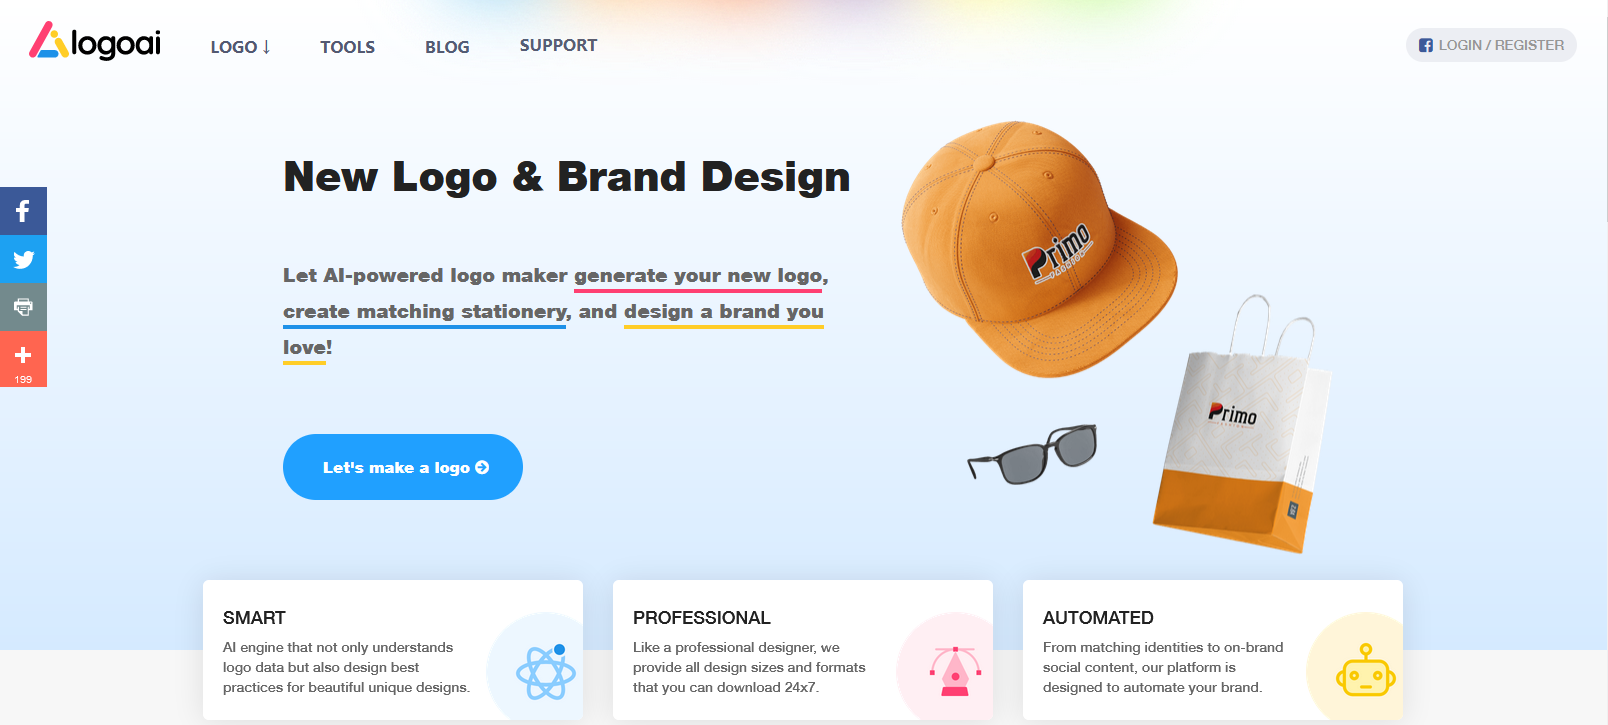 LogoAi.com - Product Information, Latest Updates, and Reviews 2023 |  Product Hunt